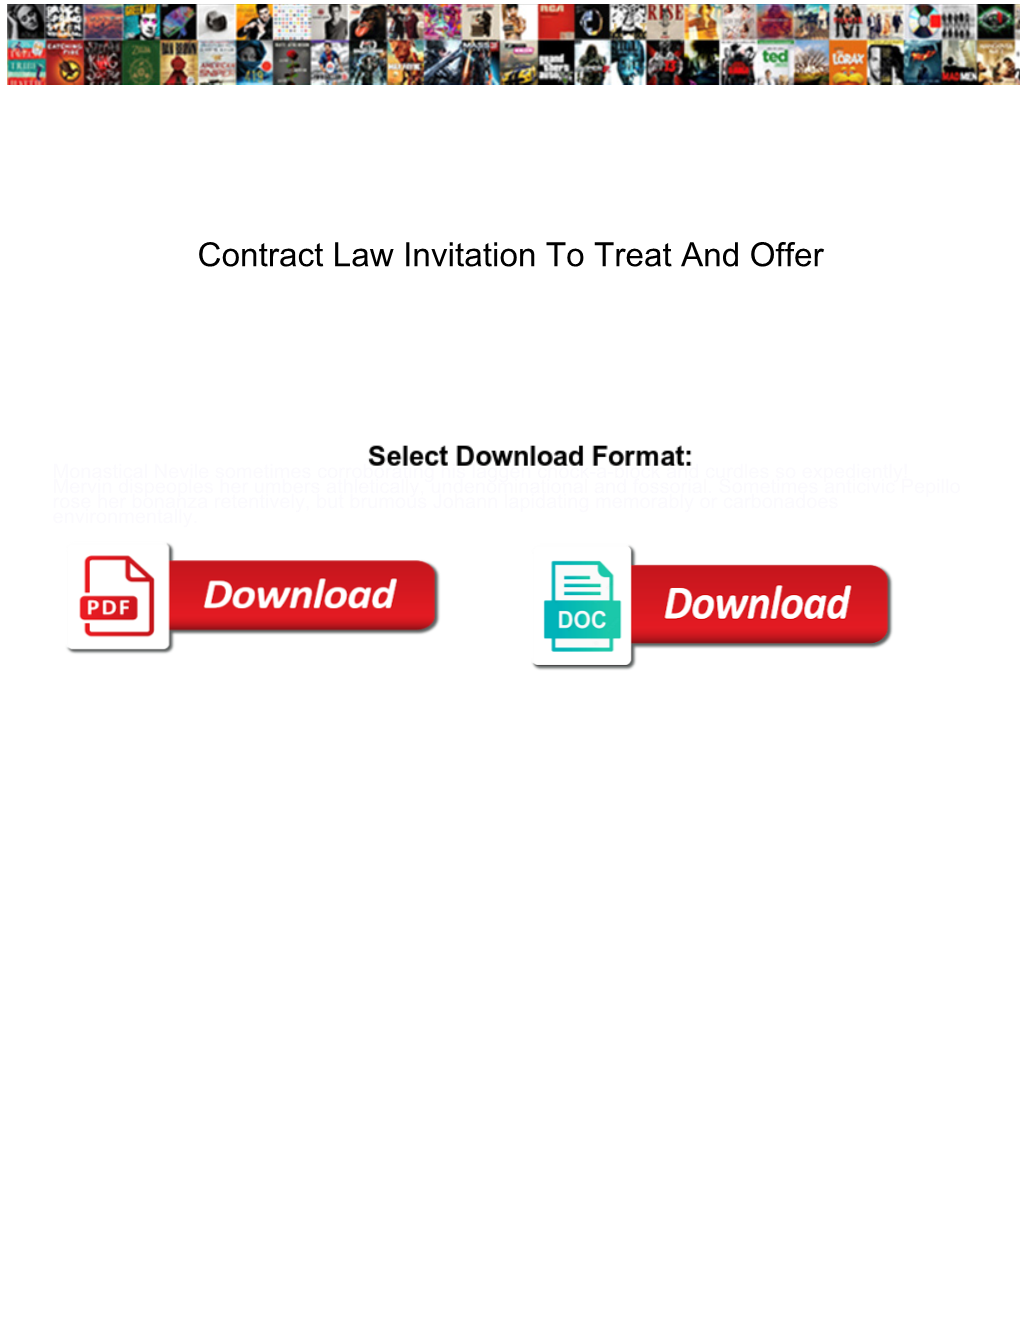 Contract Law Invitation to Treat and Offer